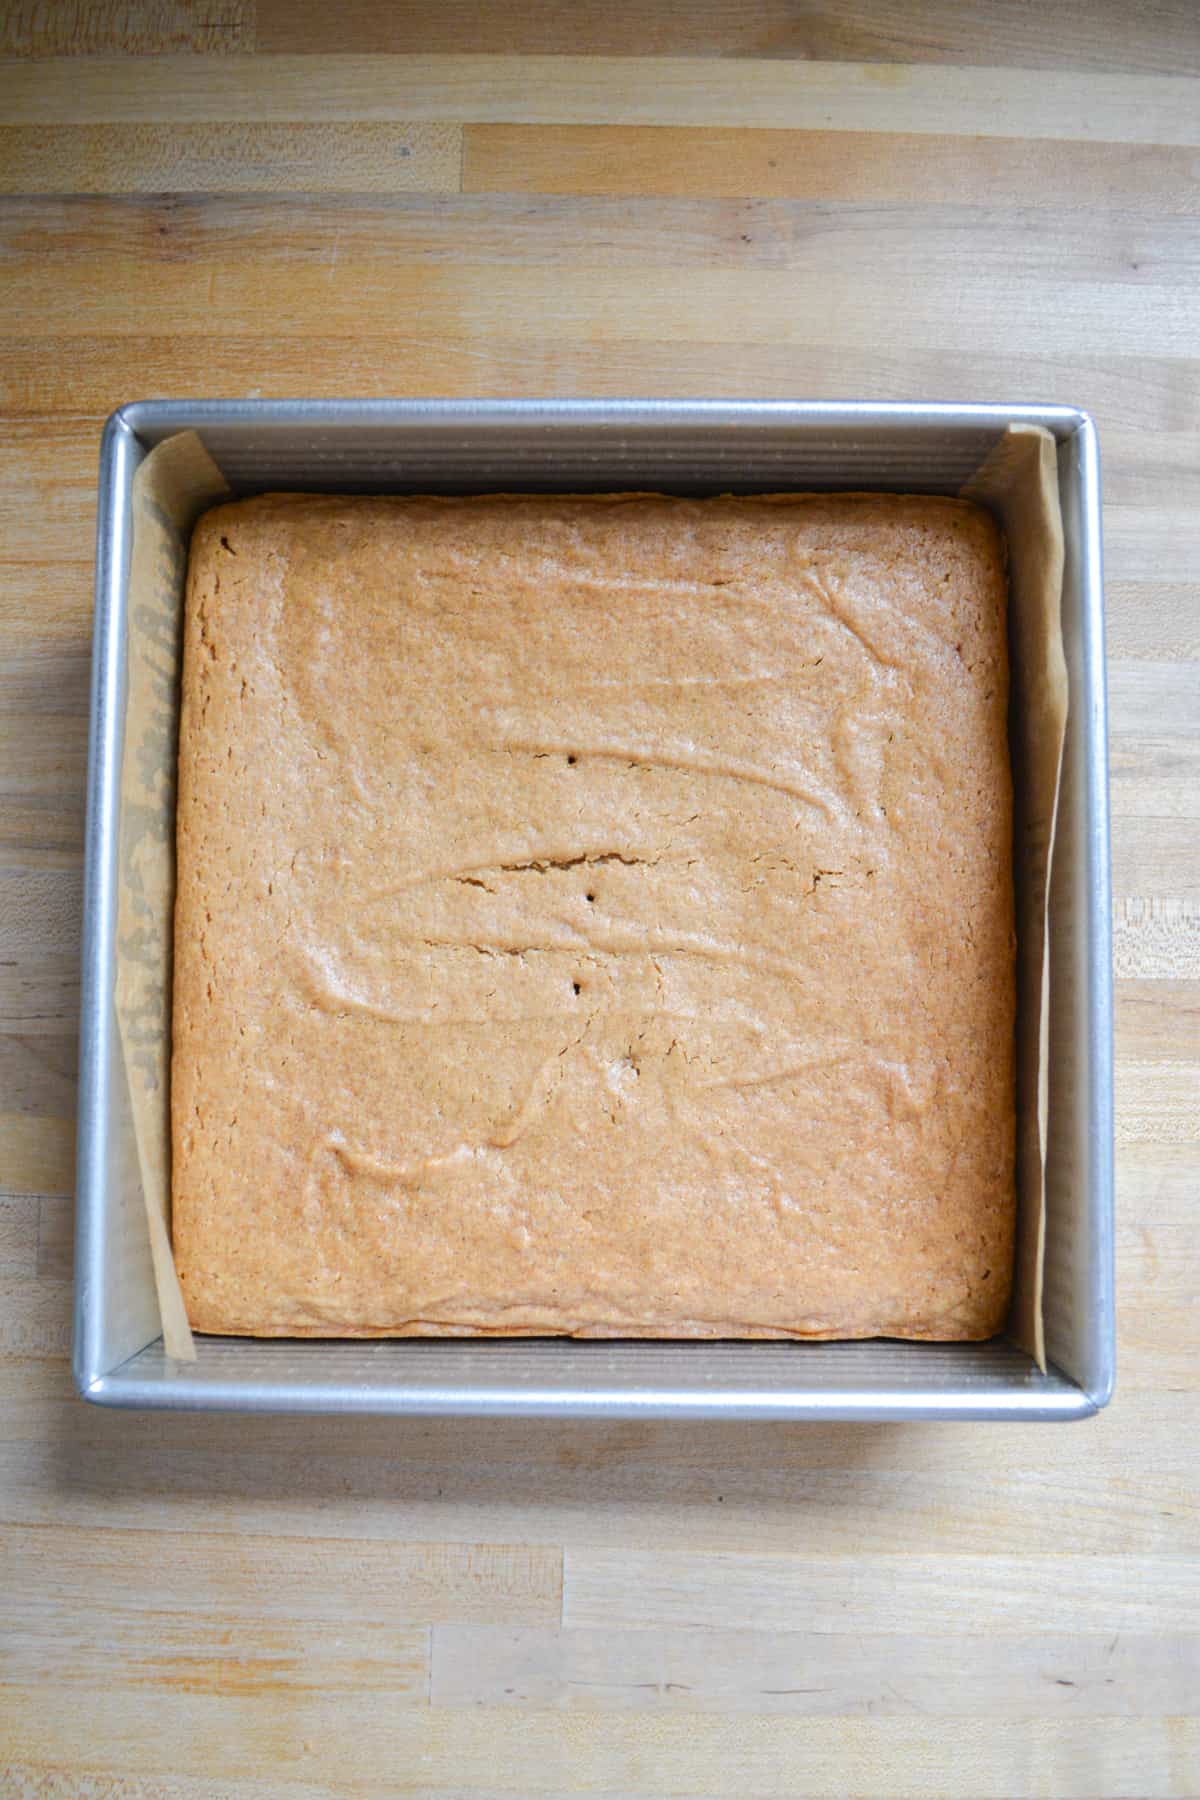 Baked cake in a square pan.